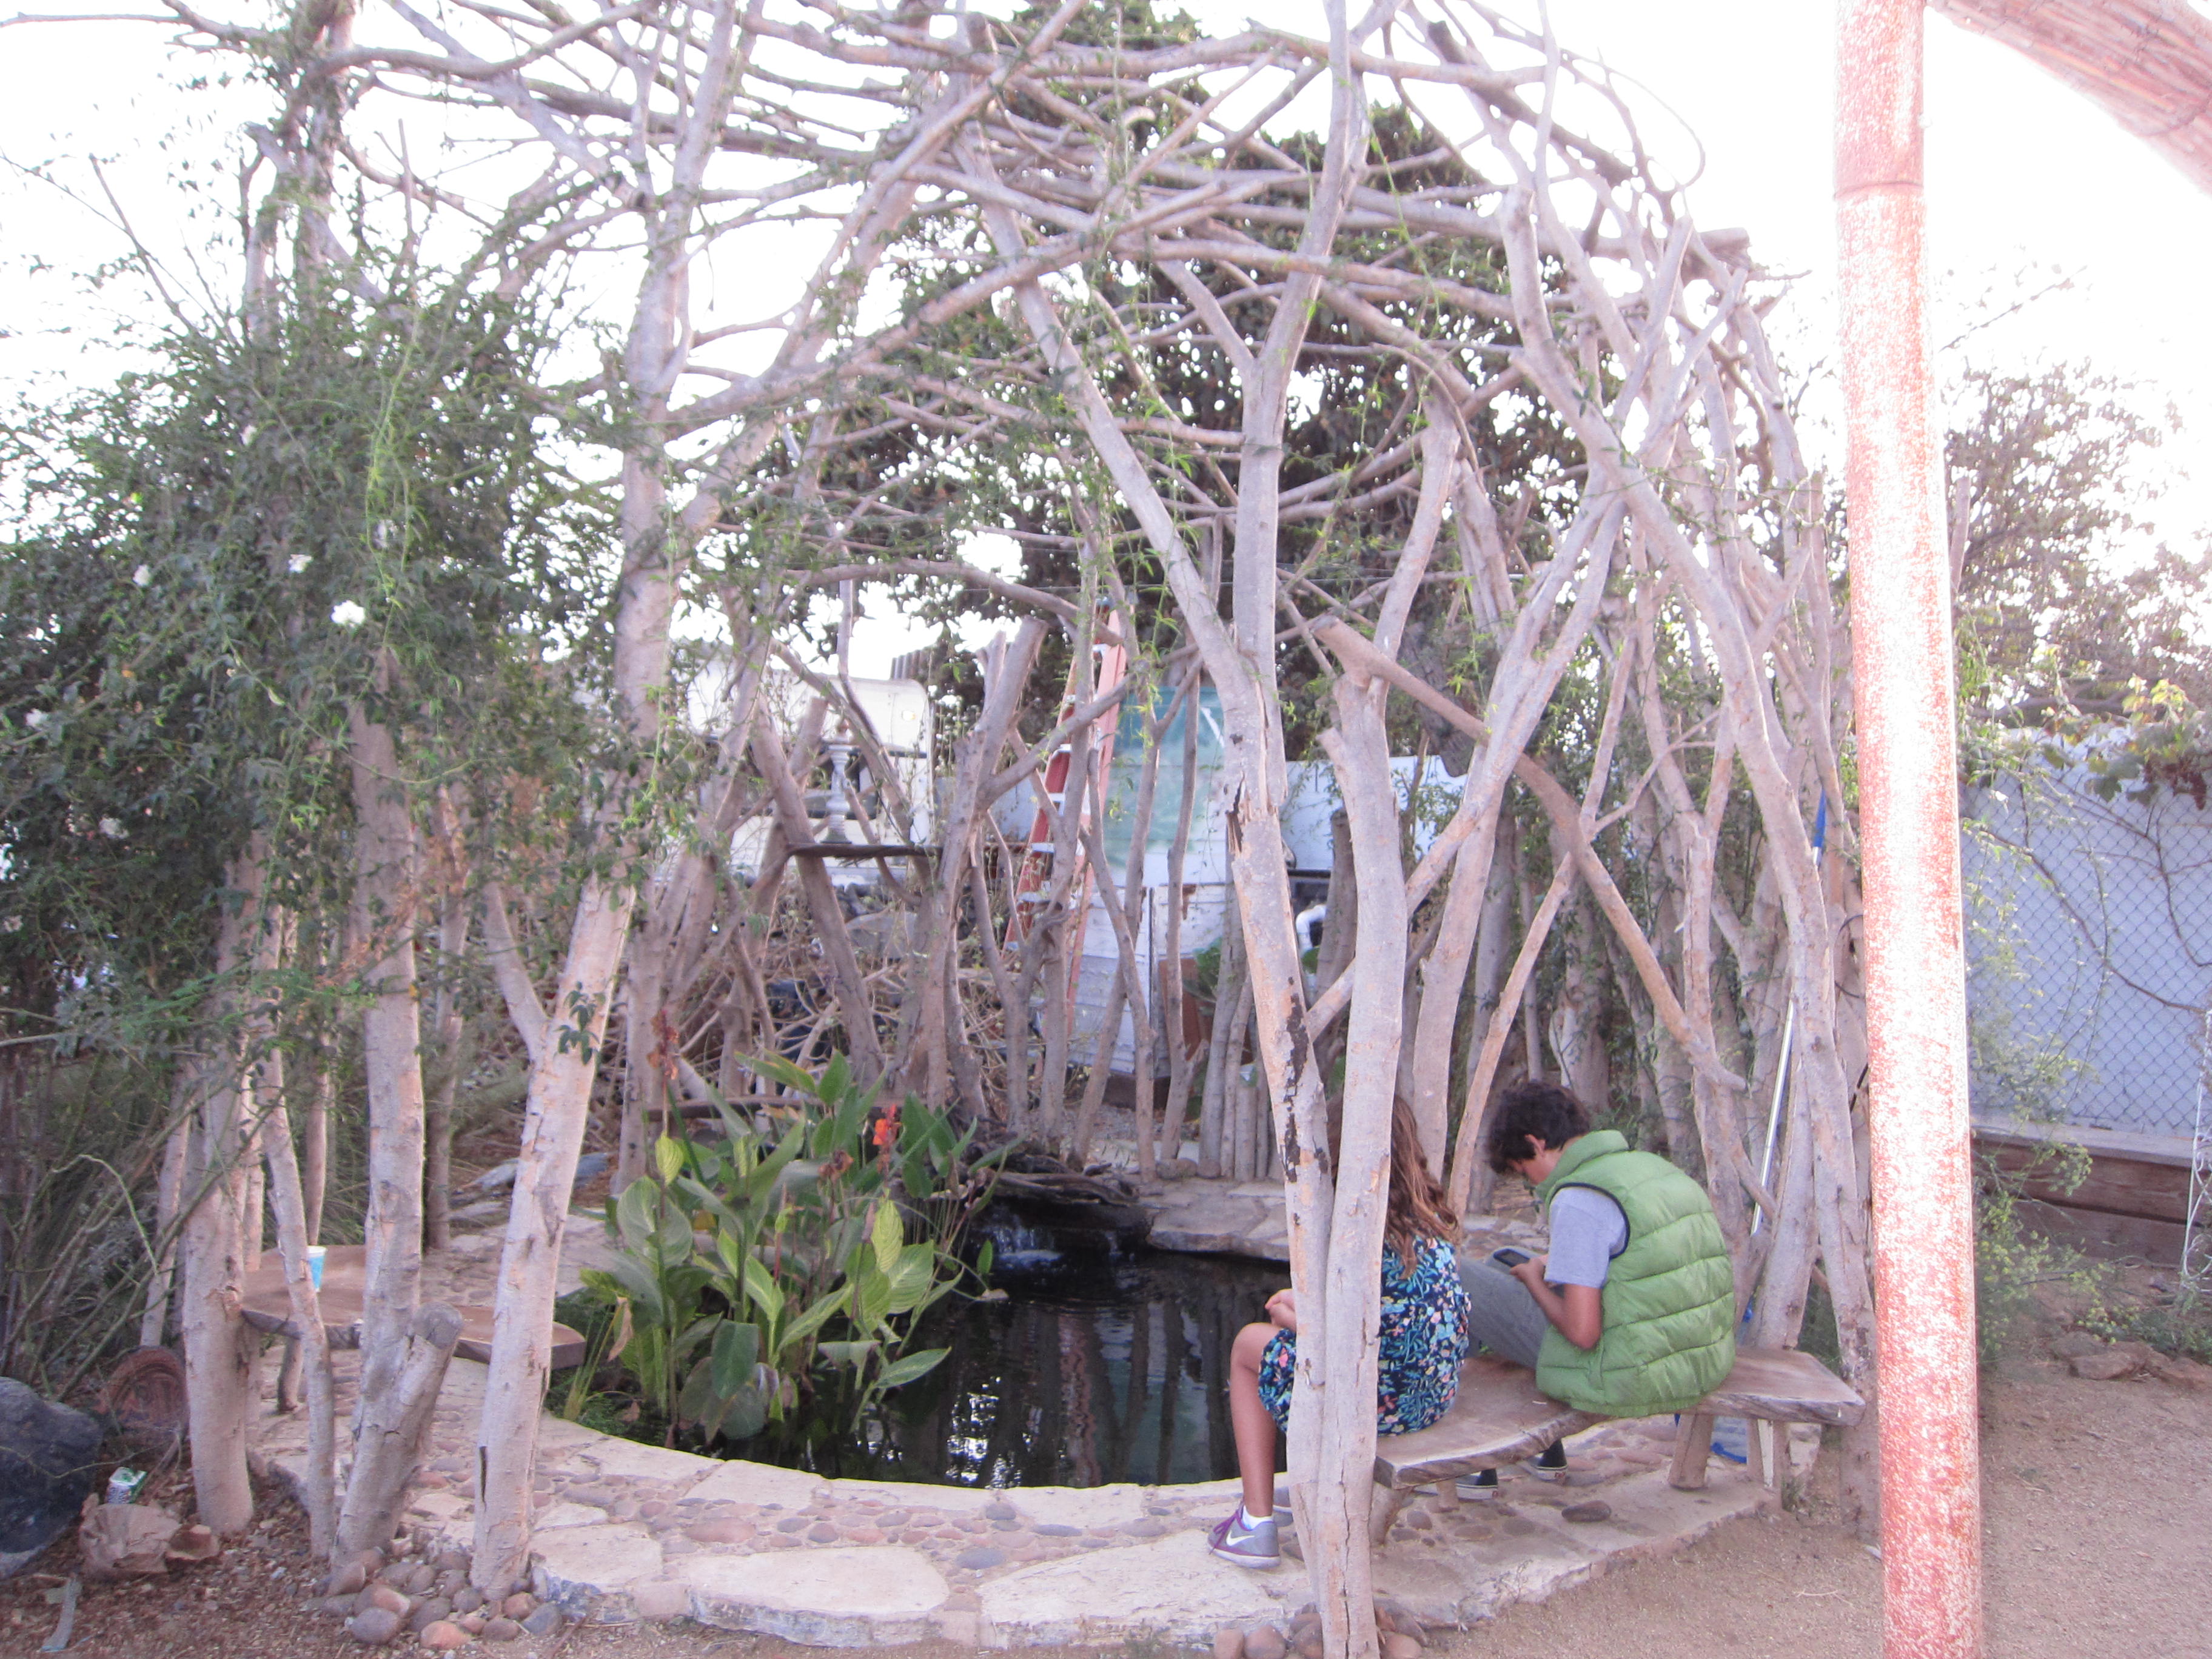 Recycled ficus trees enclose a pond and seating area for contemplation.